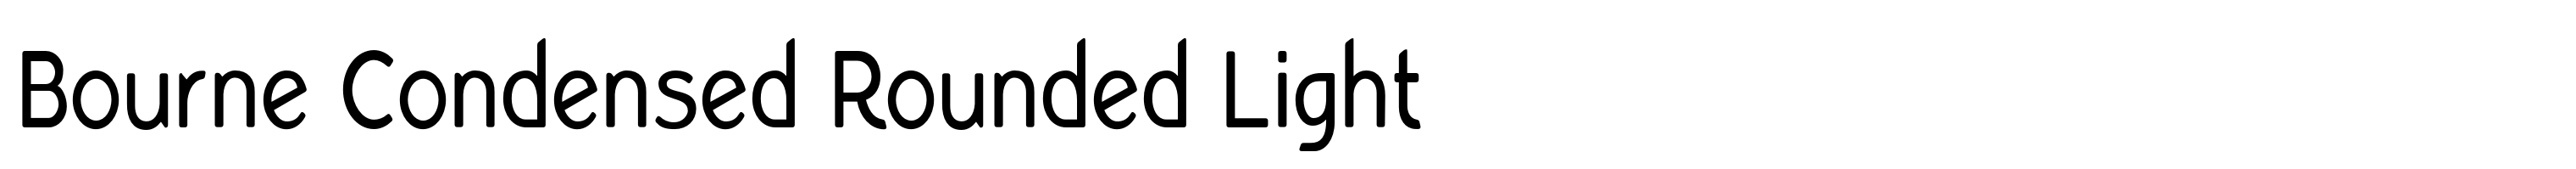 Bourne Condensed Rounded Light